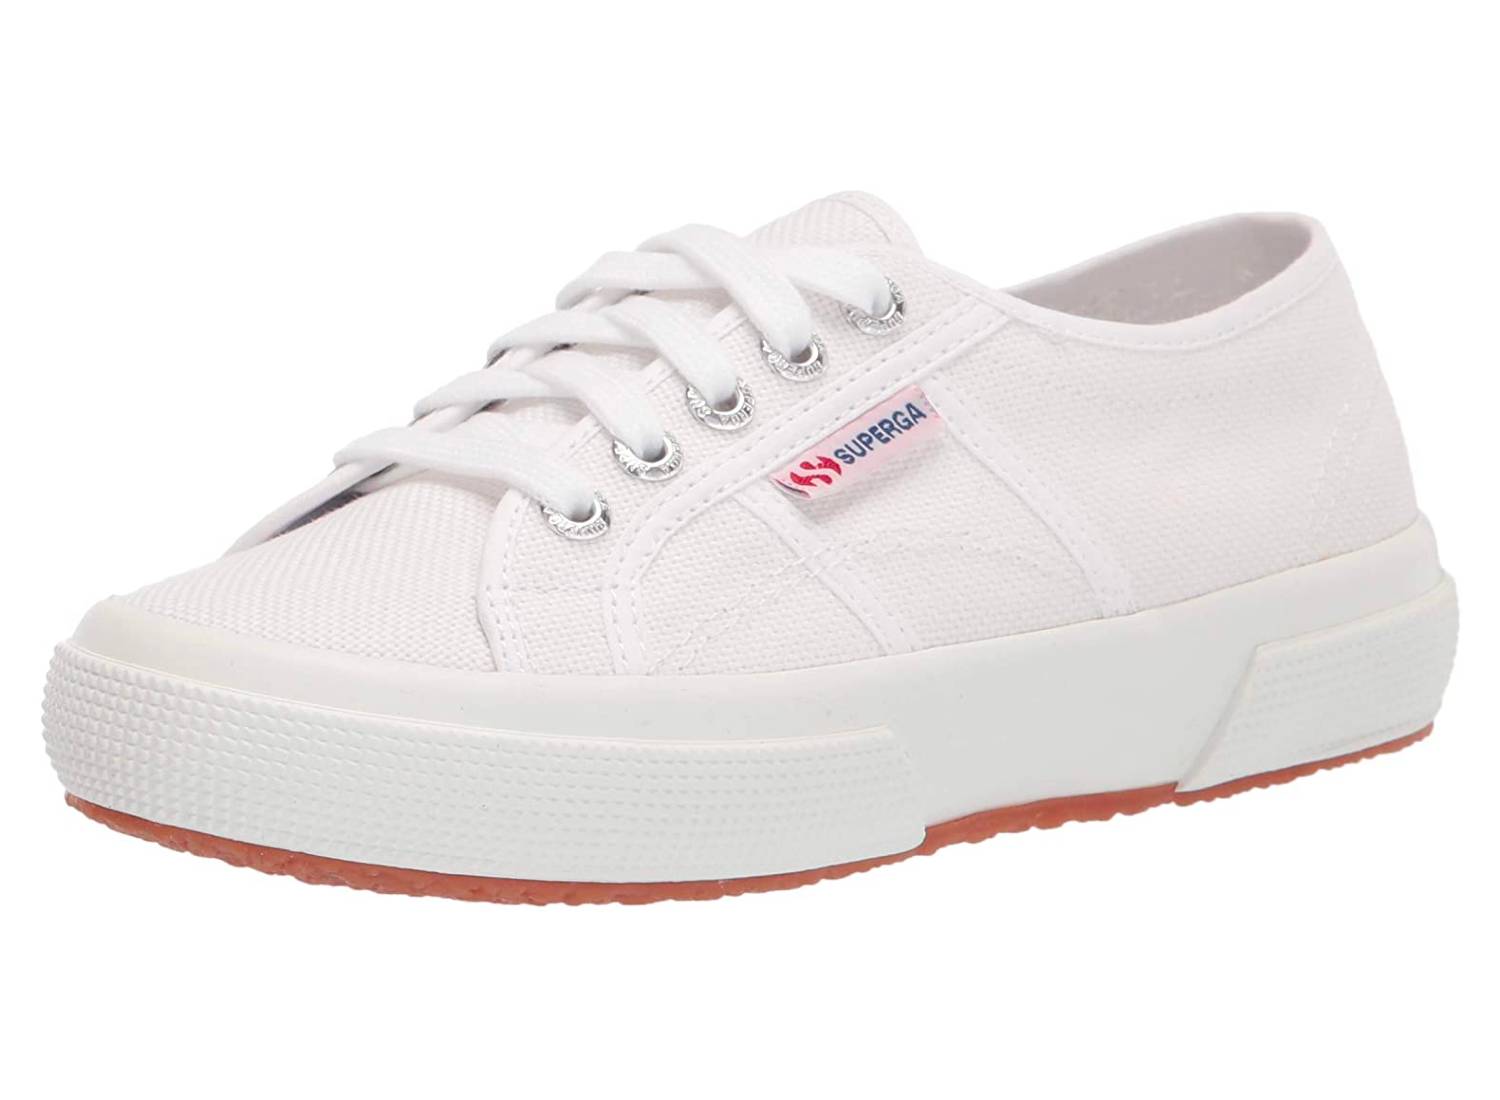 A white Superga lace-up sneaker